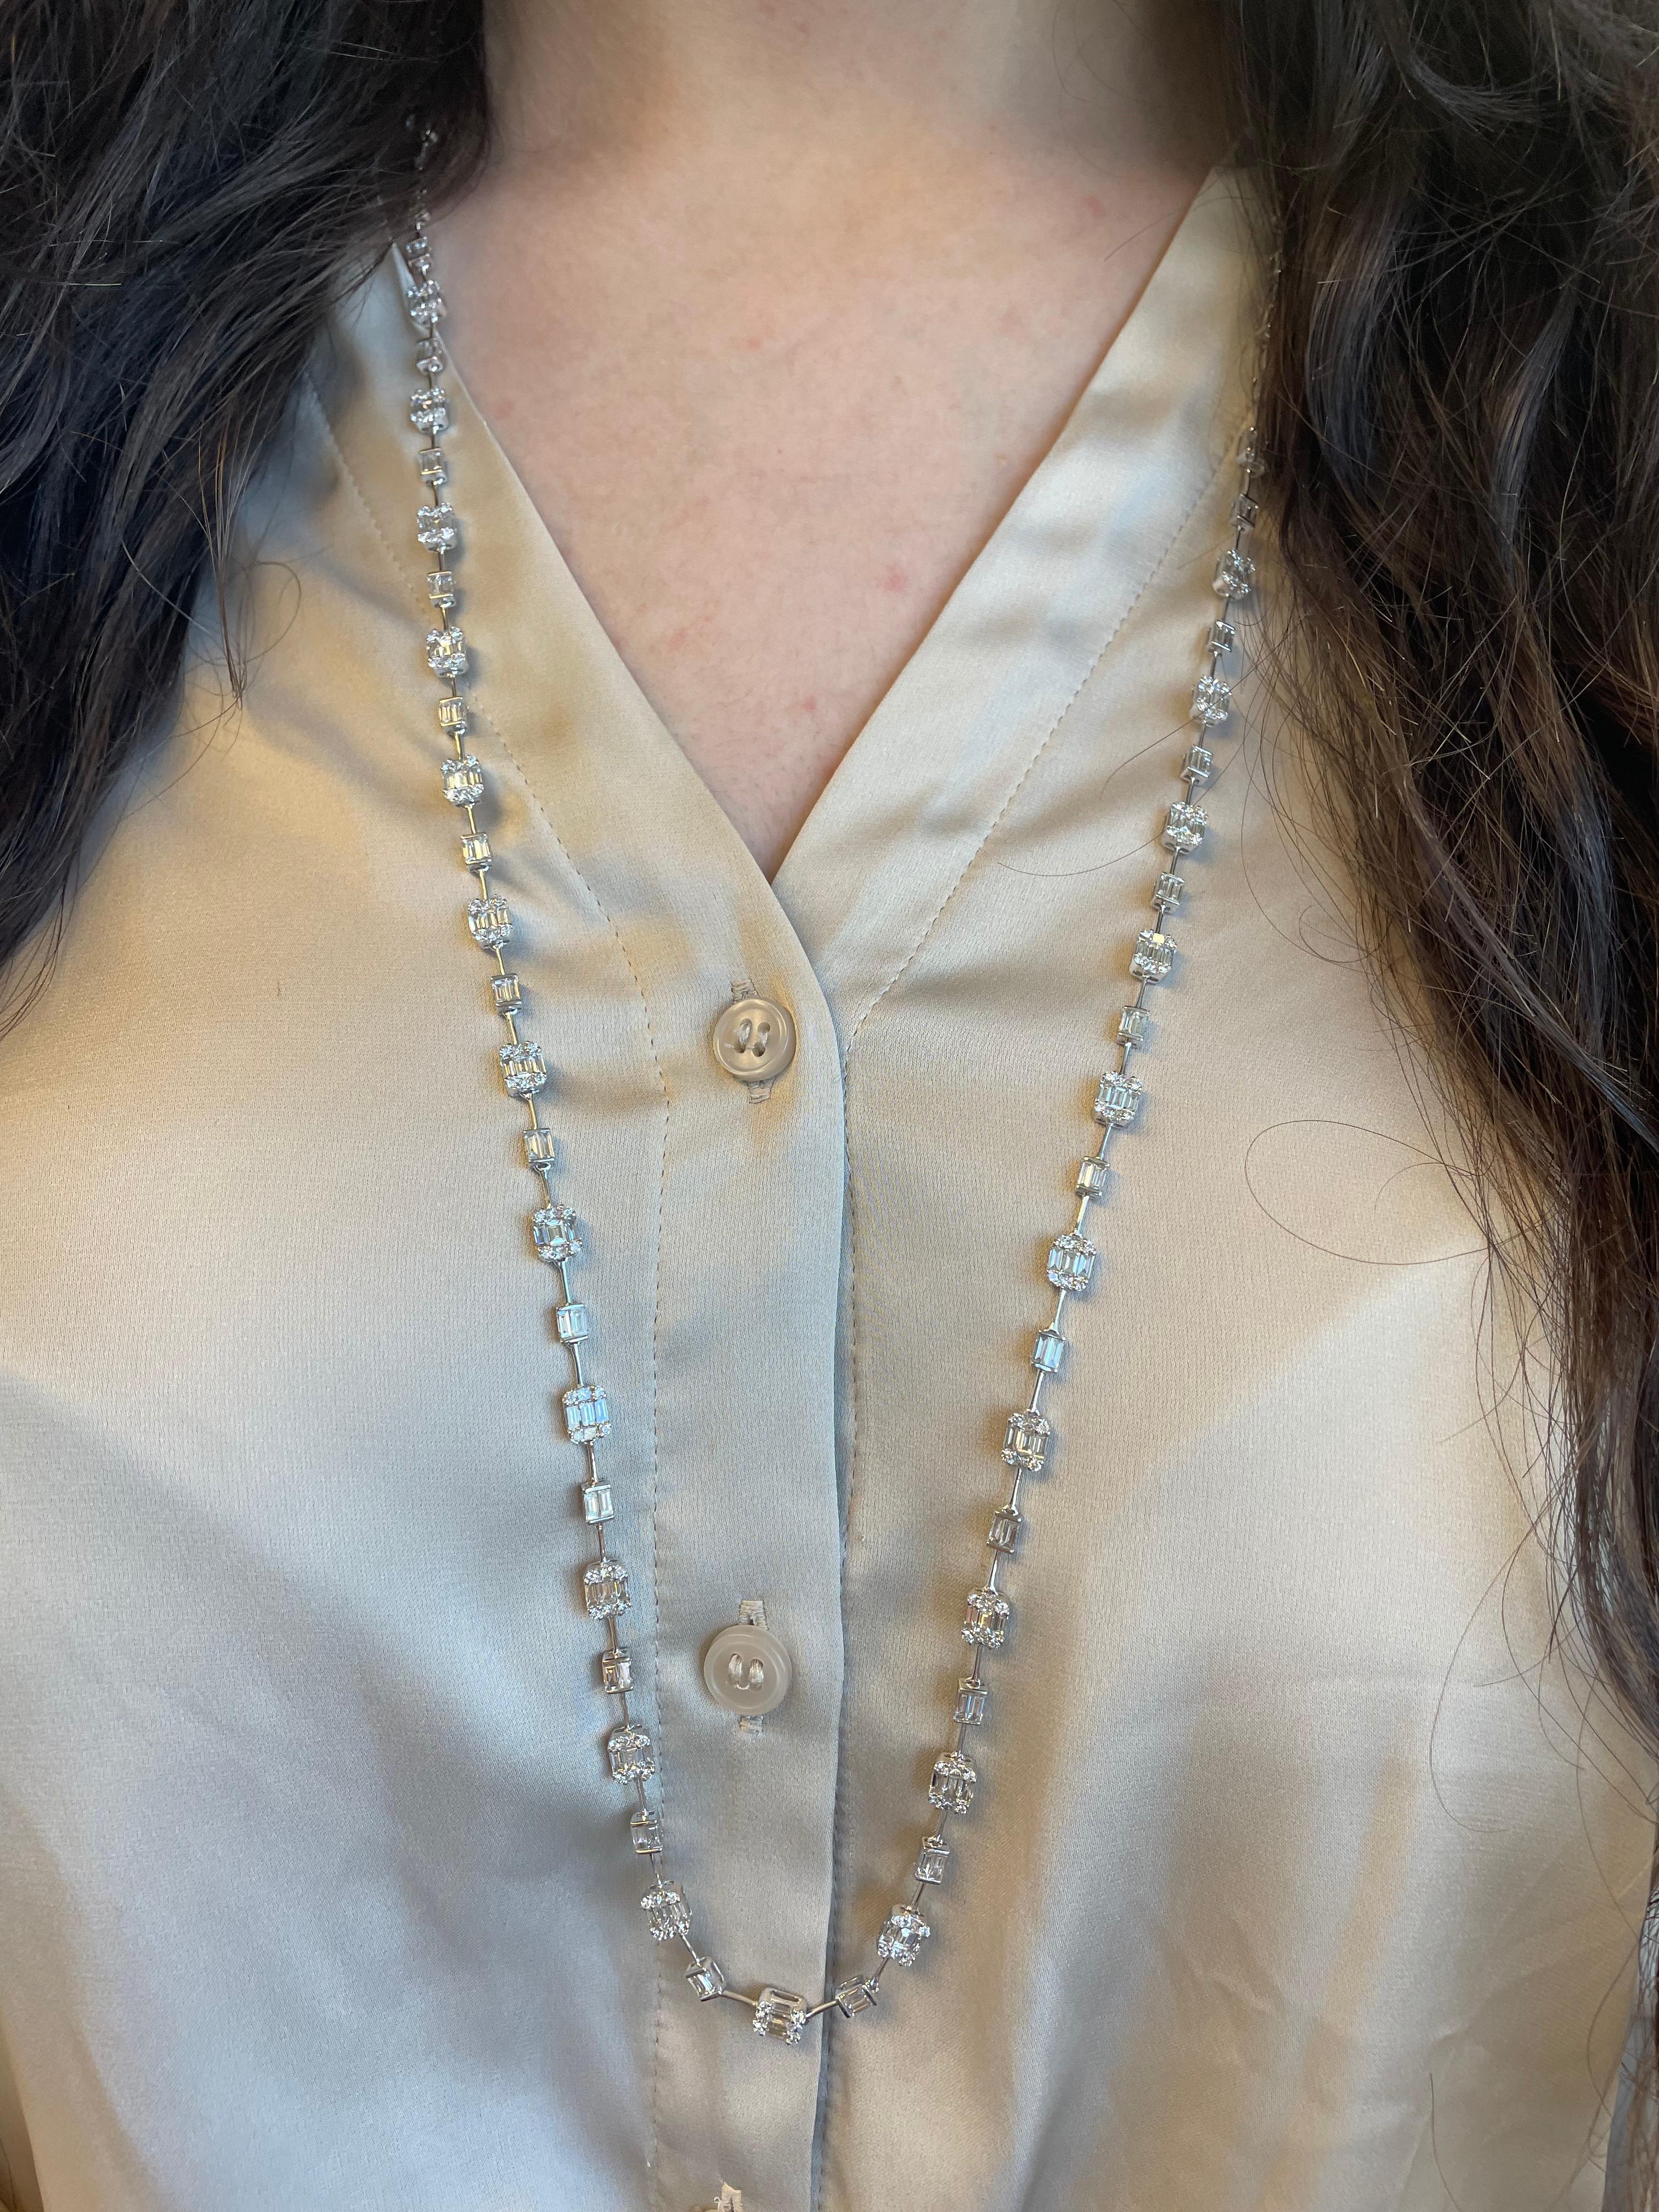 Modern illusion set diamond tennis necklace, with the look of emerald cut diamonds. By Alexander Beverly Hills.
440 round, princess, and baguette cut diamonds, 11.36 carats total. Baguette and princess cut shape diamond pattern, illusion set.